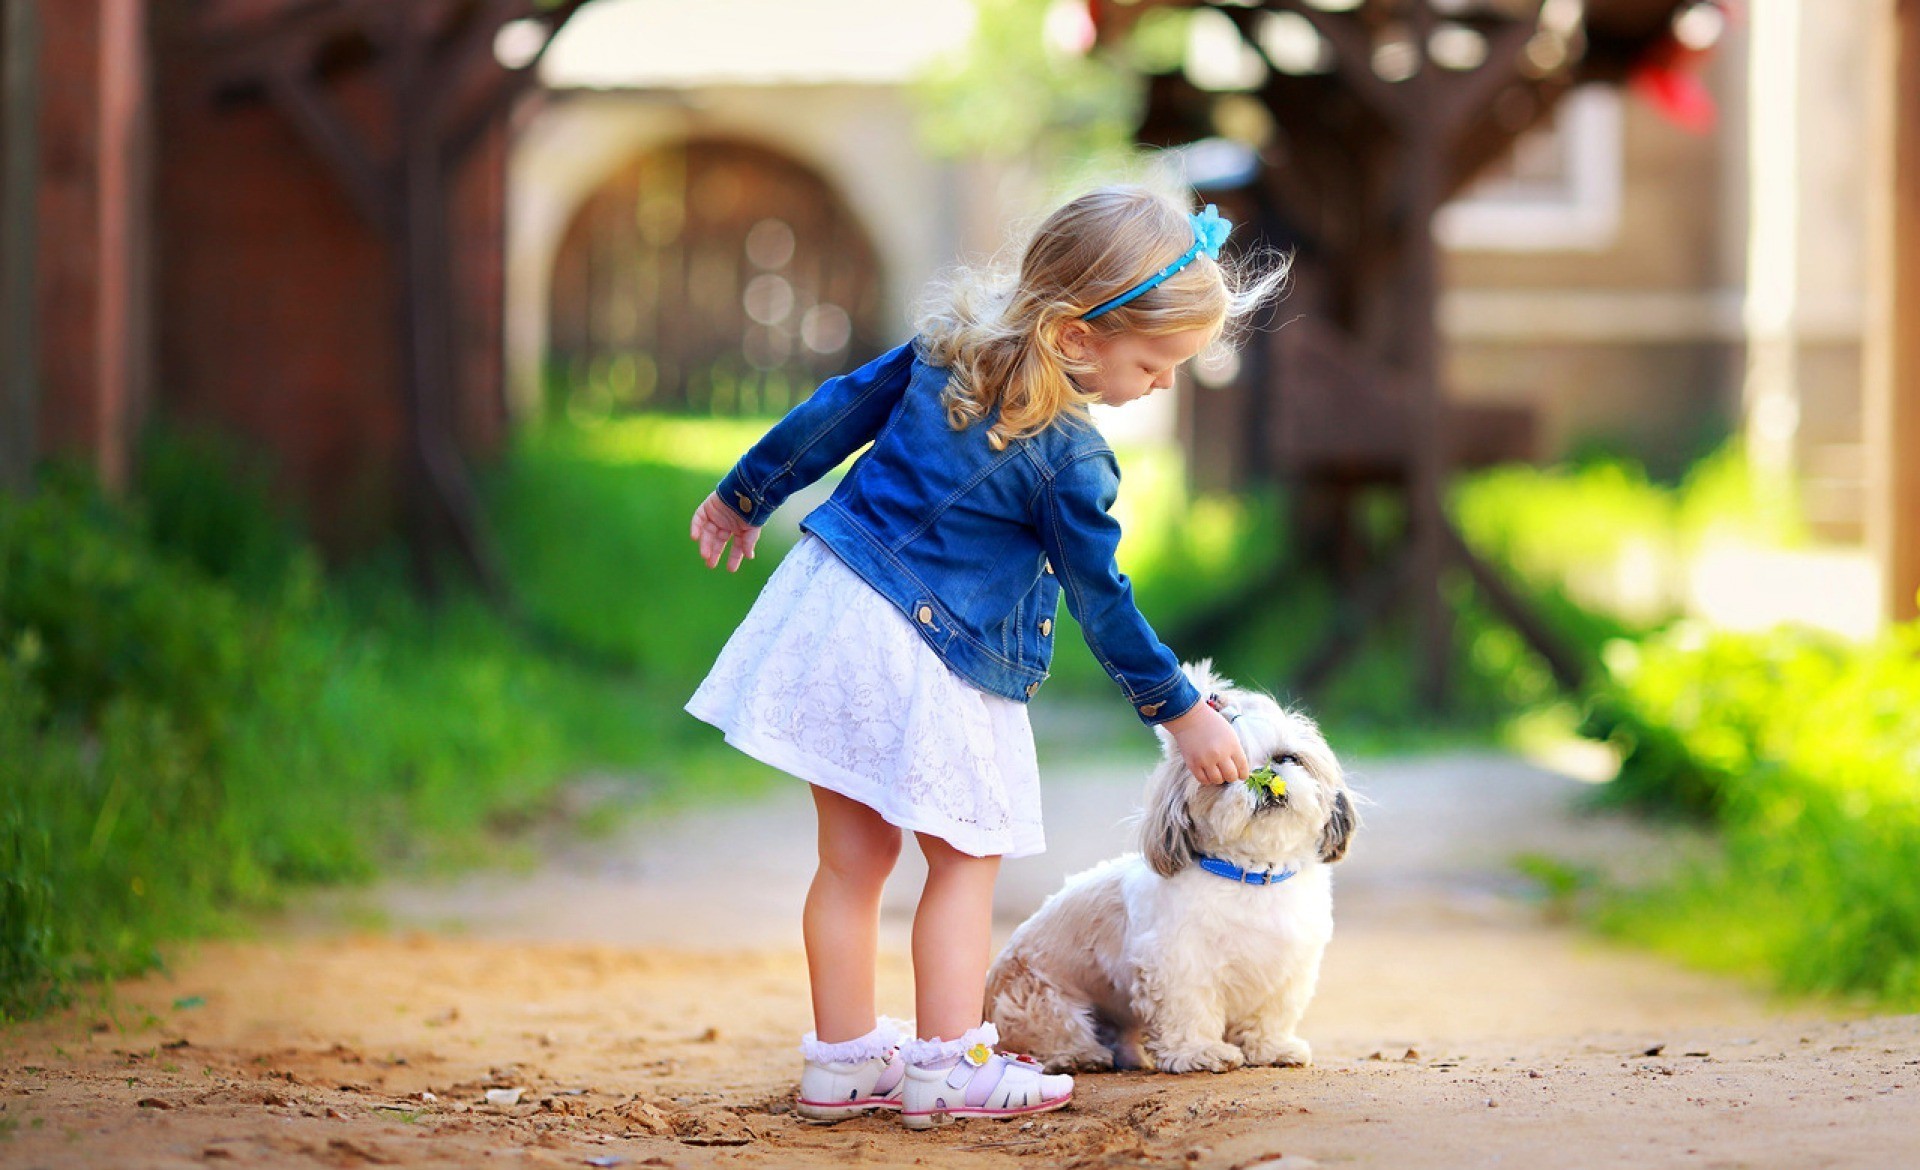 Cute Girl With Dog - HD Wallpaper 